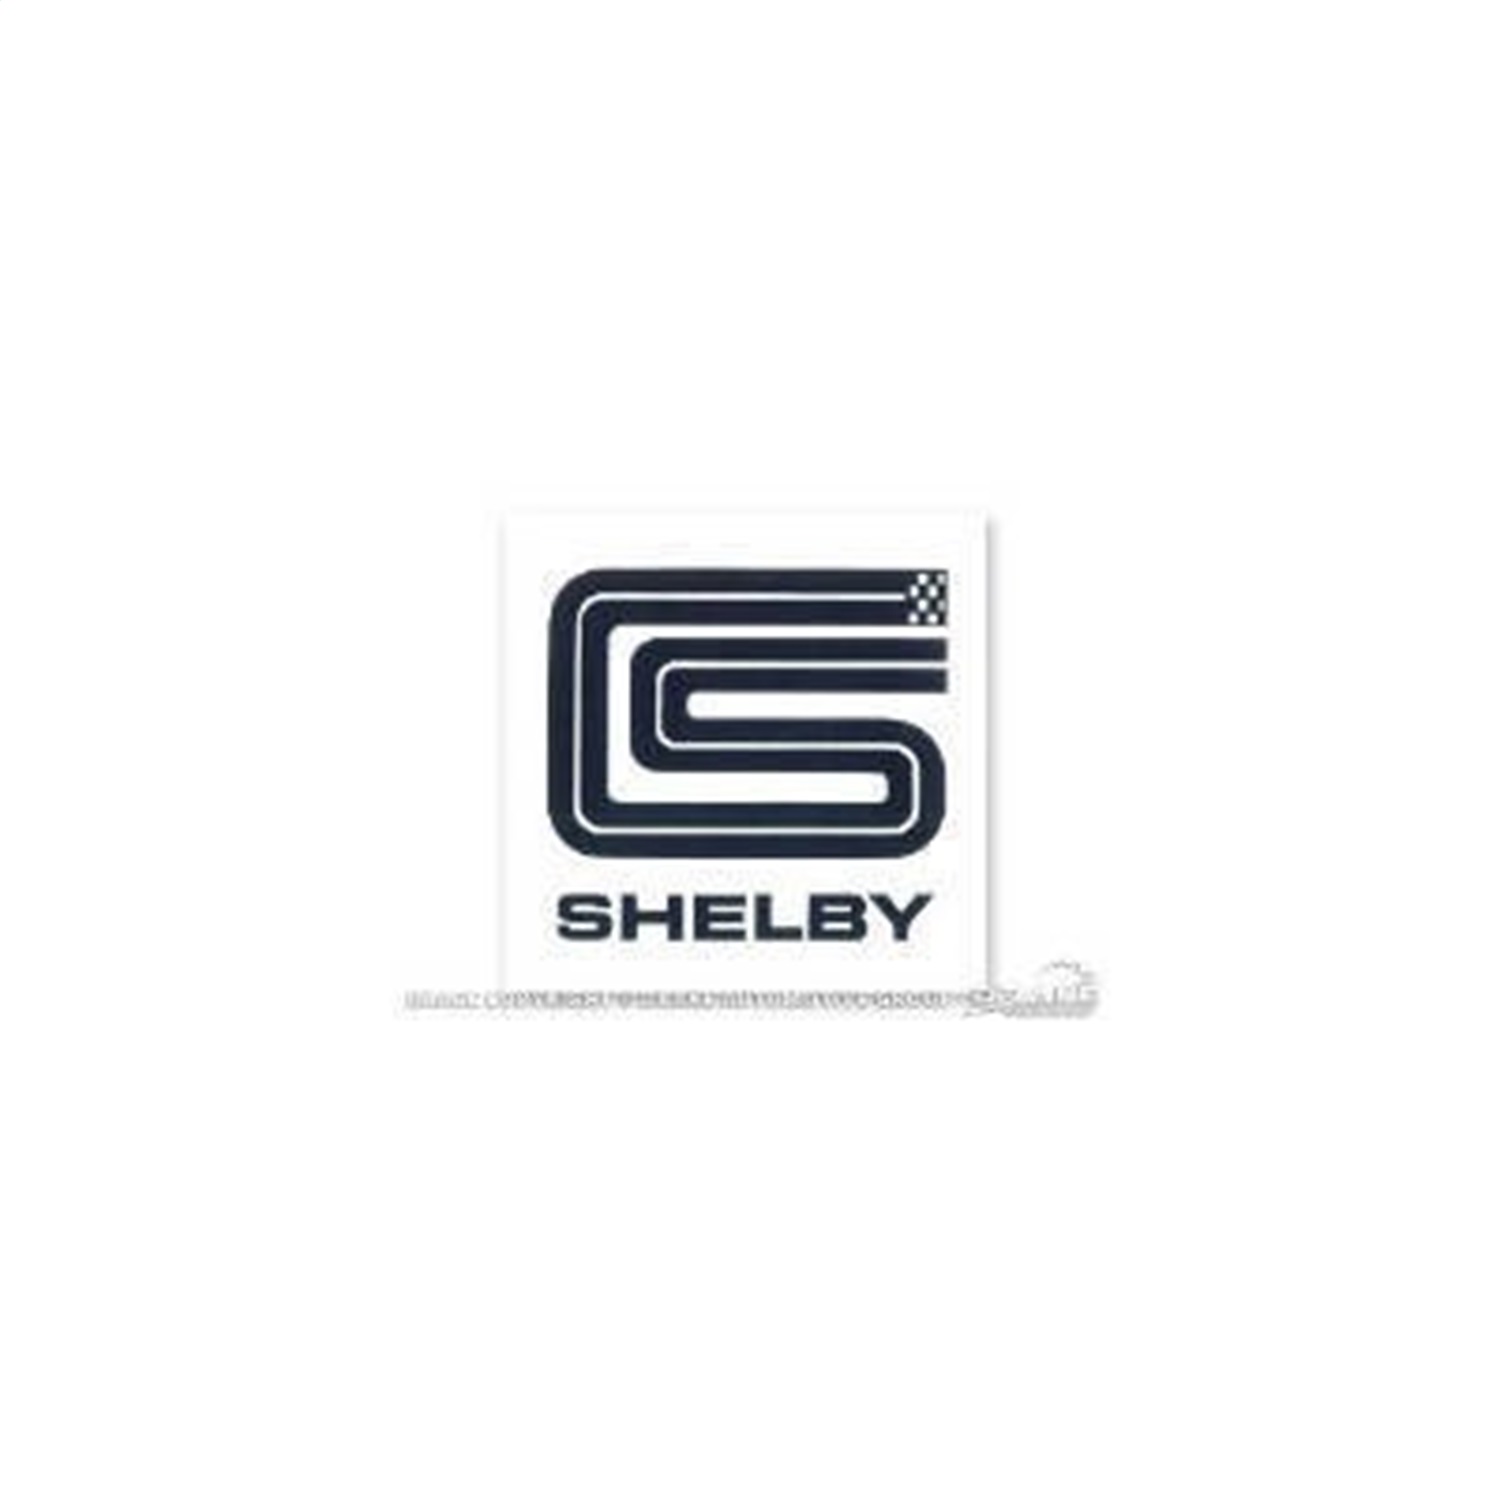 3 CS SHELBY SQUARE DECAL